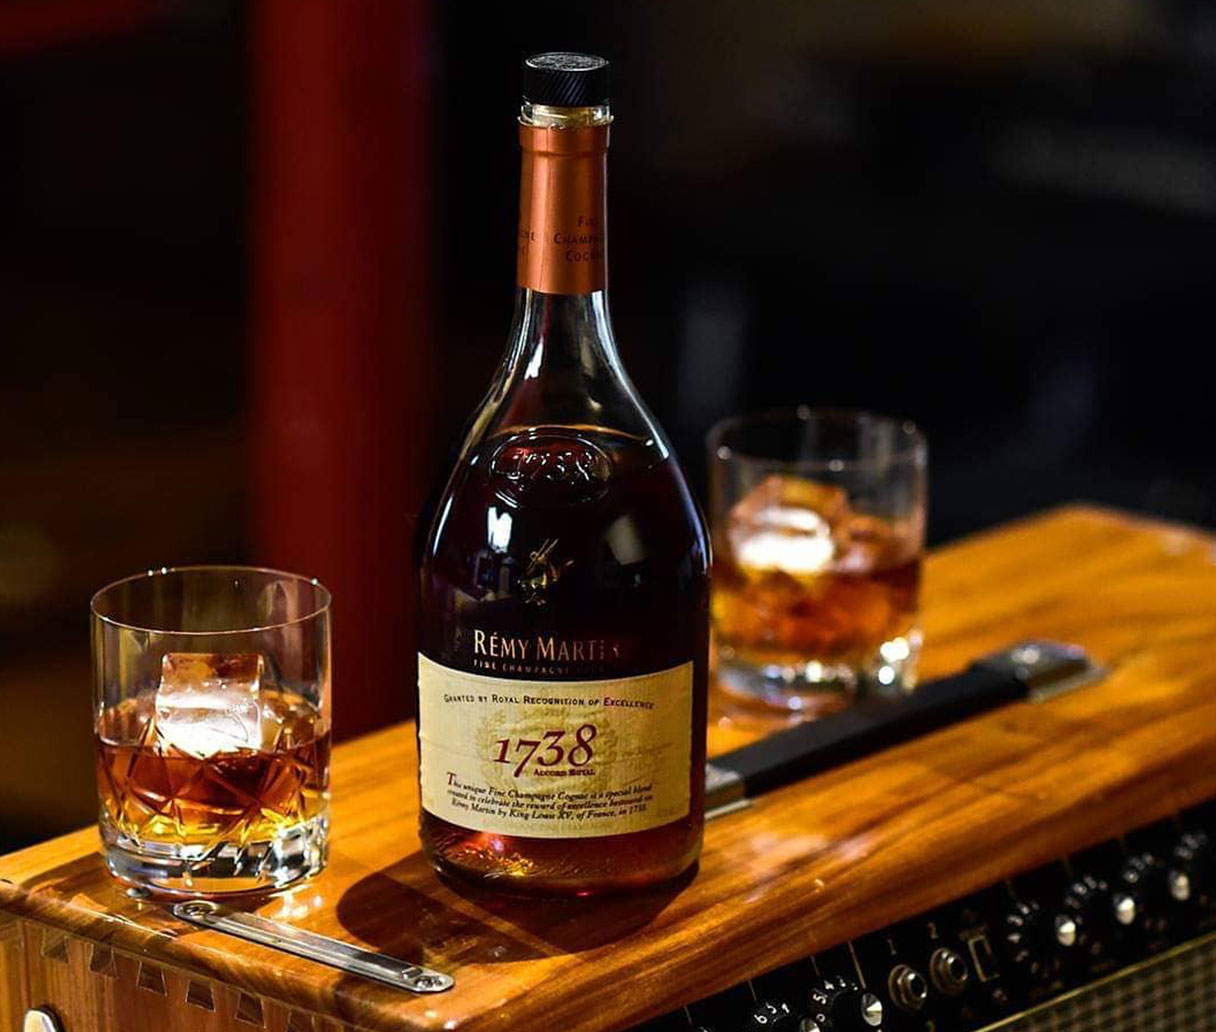 Rémy Martin - How to drink cognac - Neat or on the rocks - UK